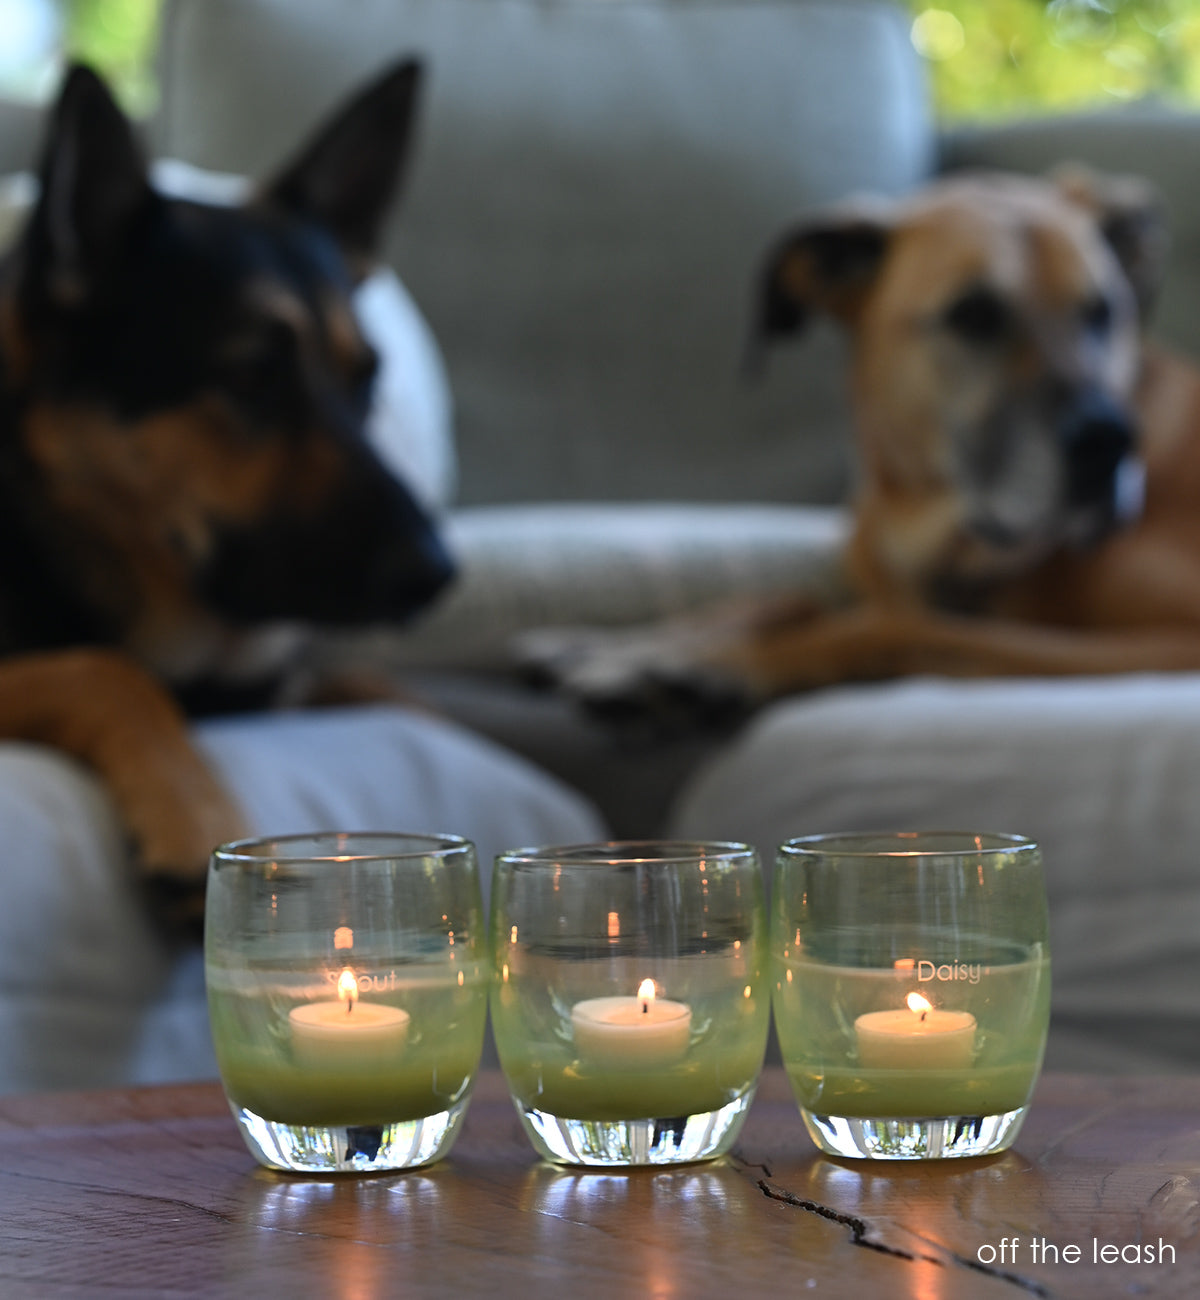 off the leash is a moss green hand-blown glass votive candle holder. transparent towards the top.